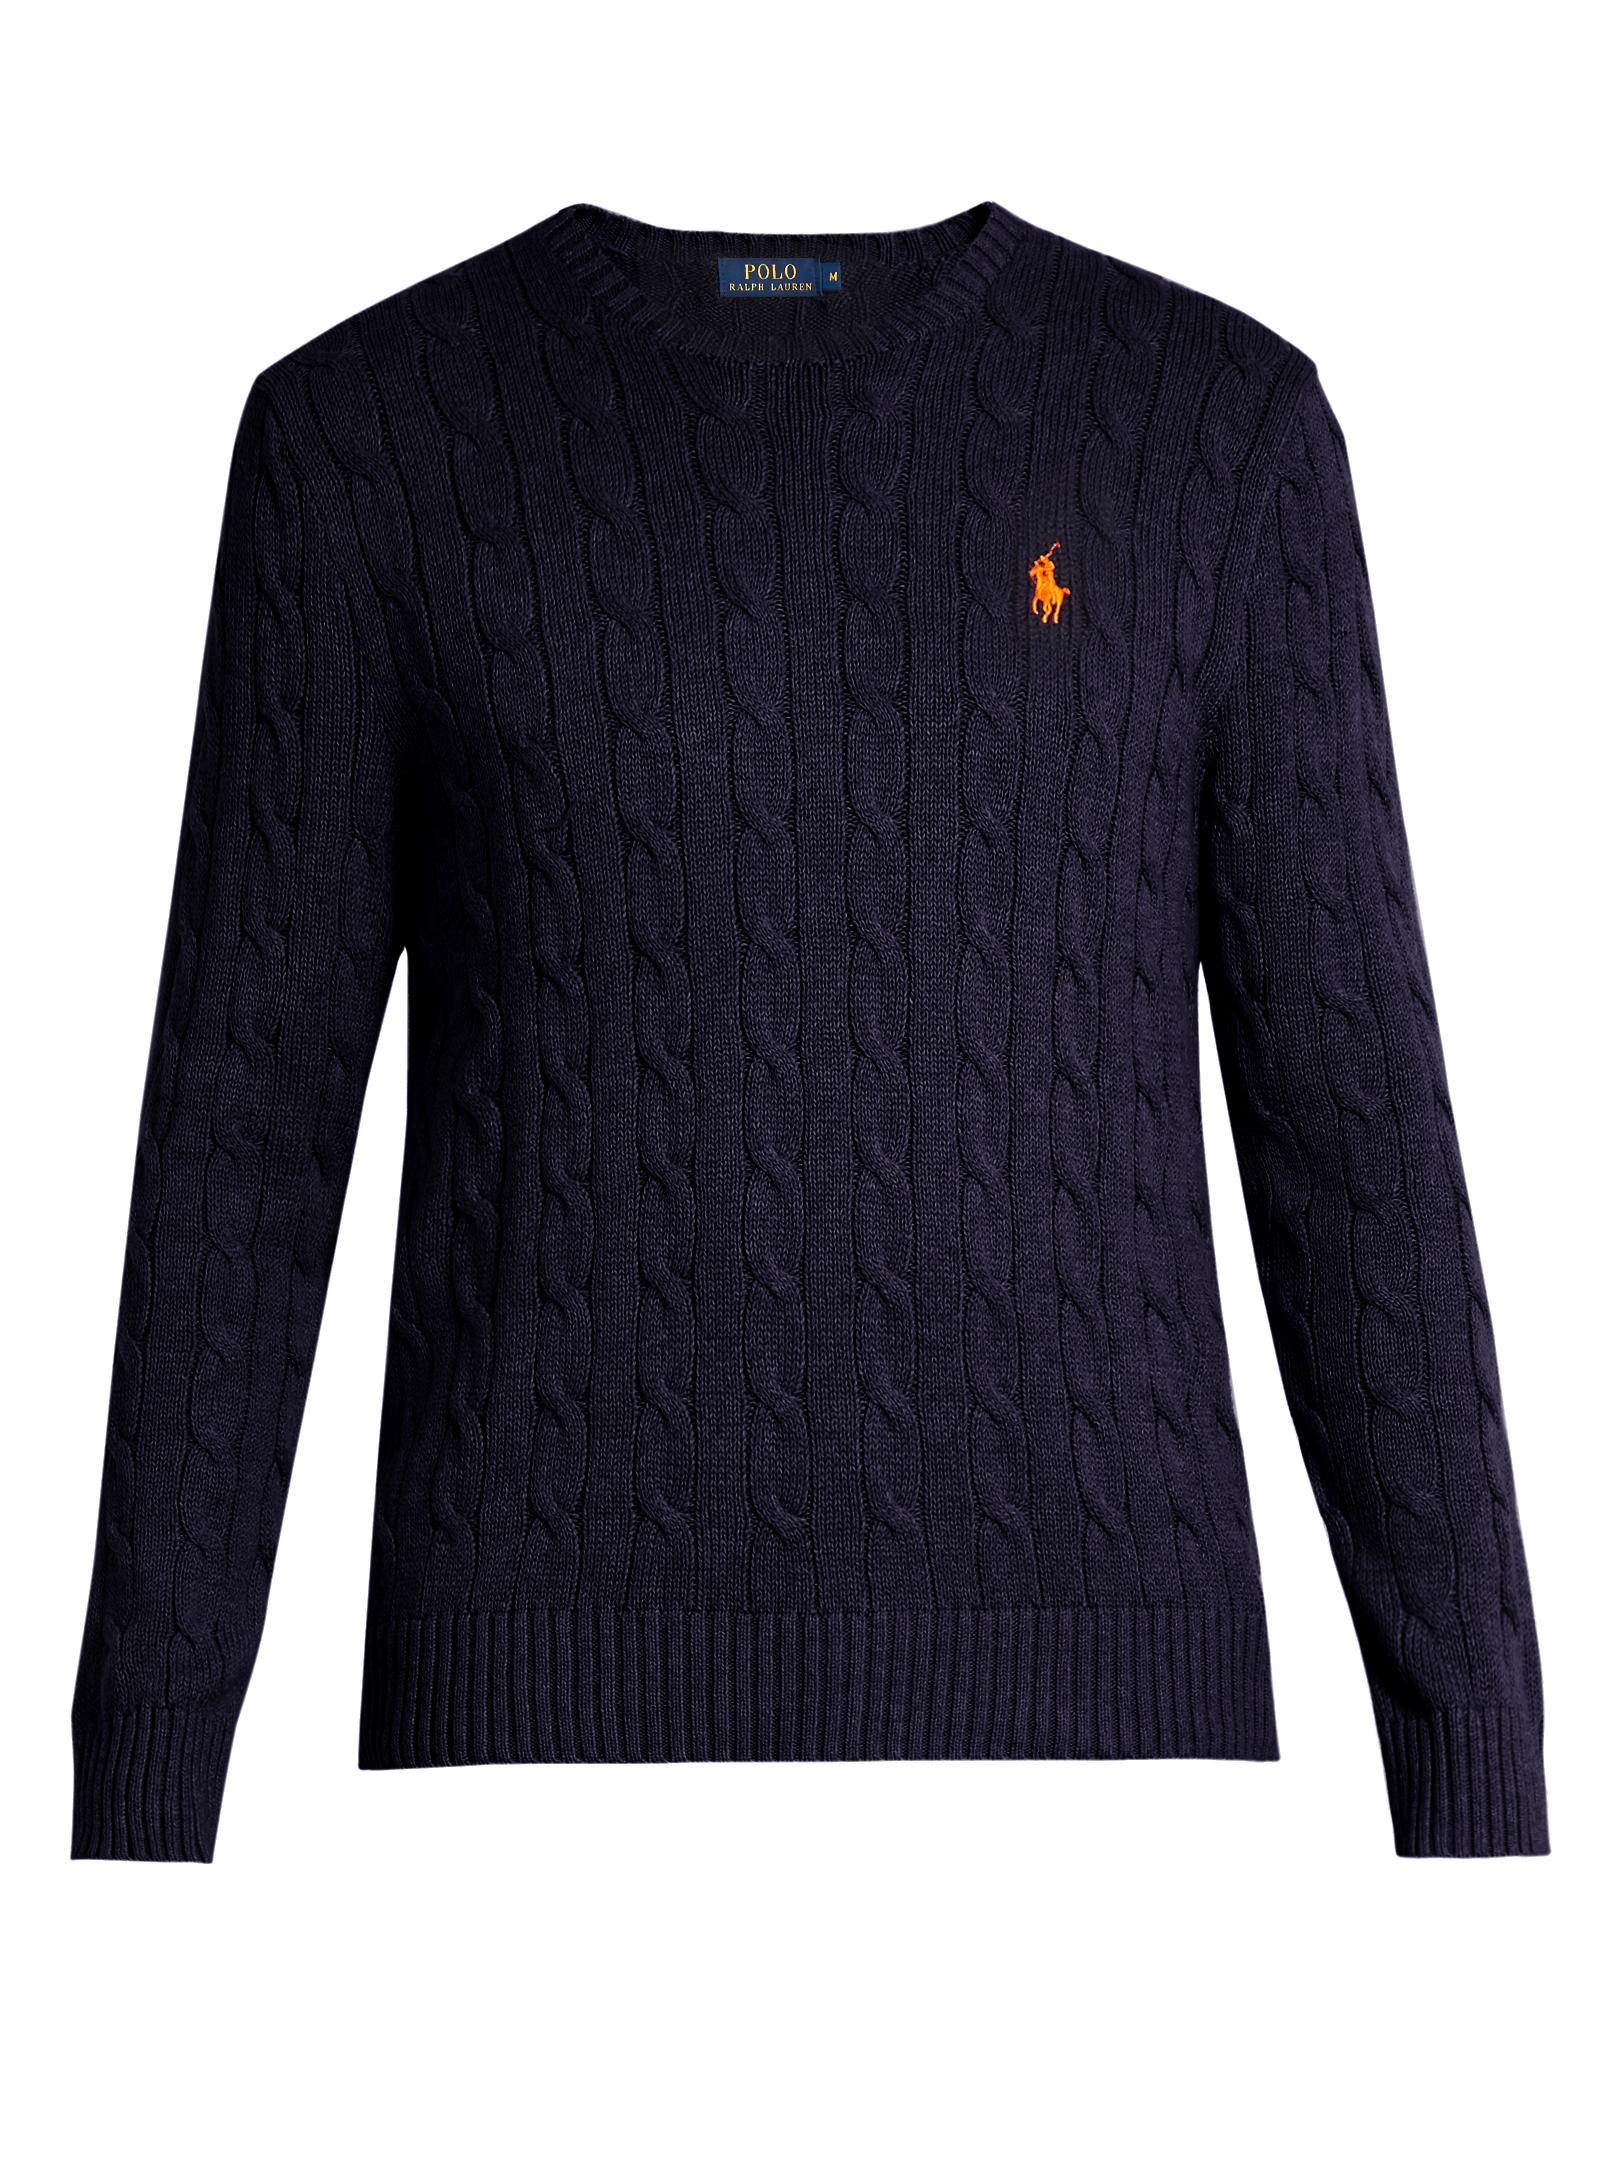 Lyst - Polo ralph lauren Crew-neck Cable-knit Cotton Sweater in Blue ...